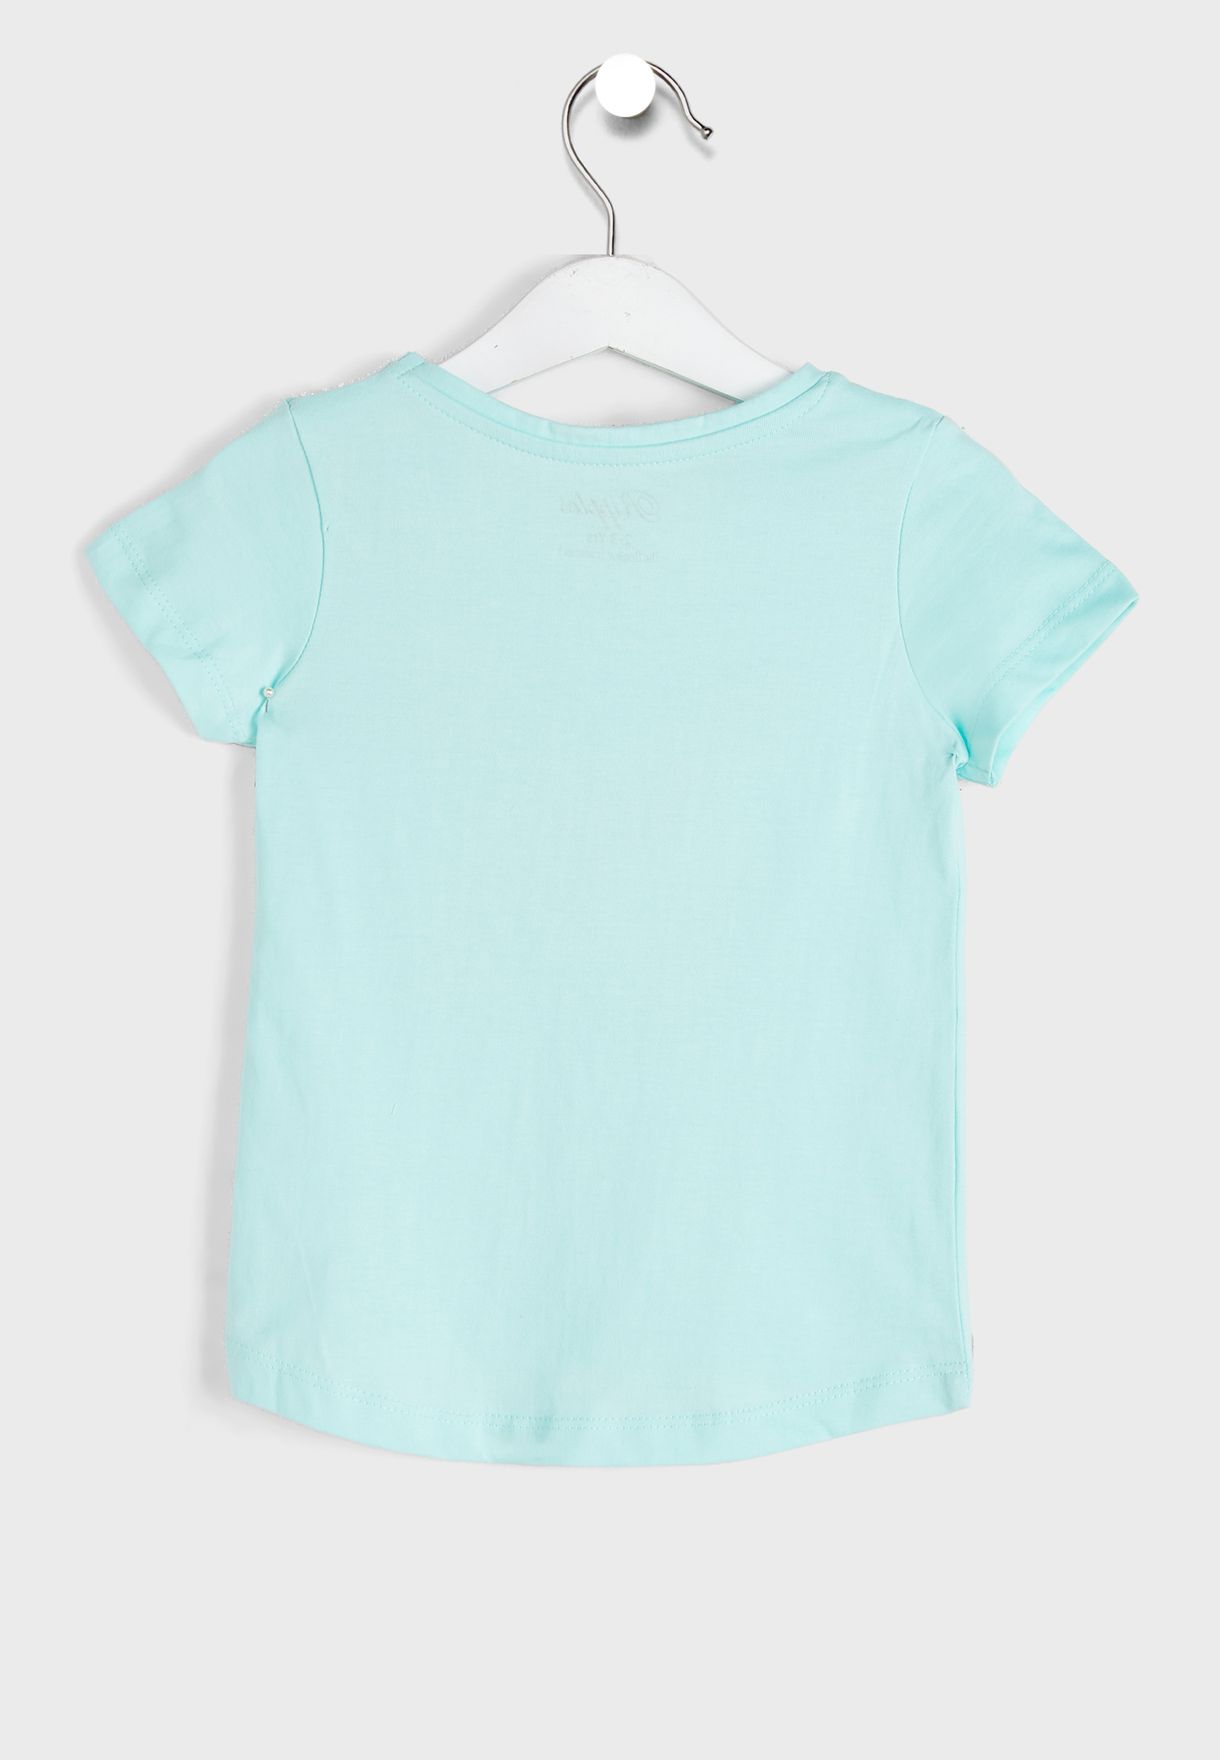 Round Neck T-Shirt Withn Sequin Detailing